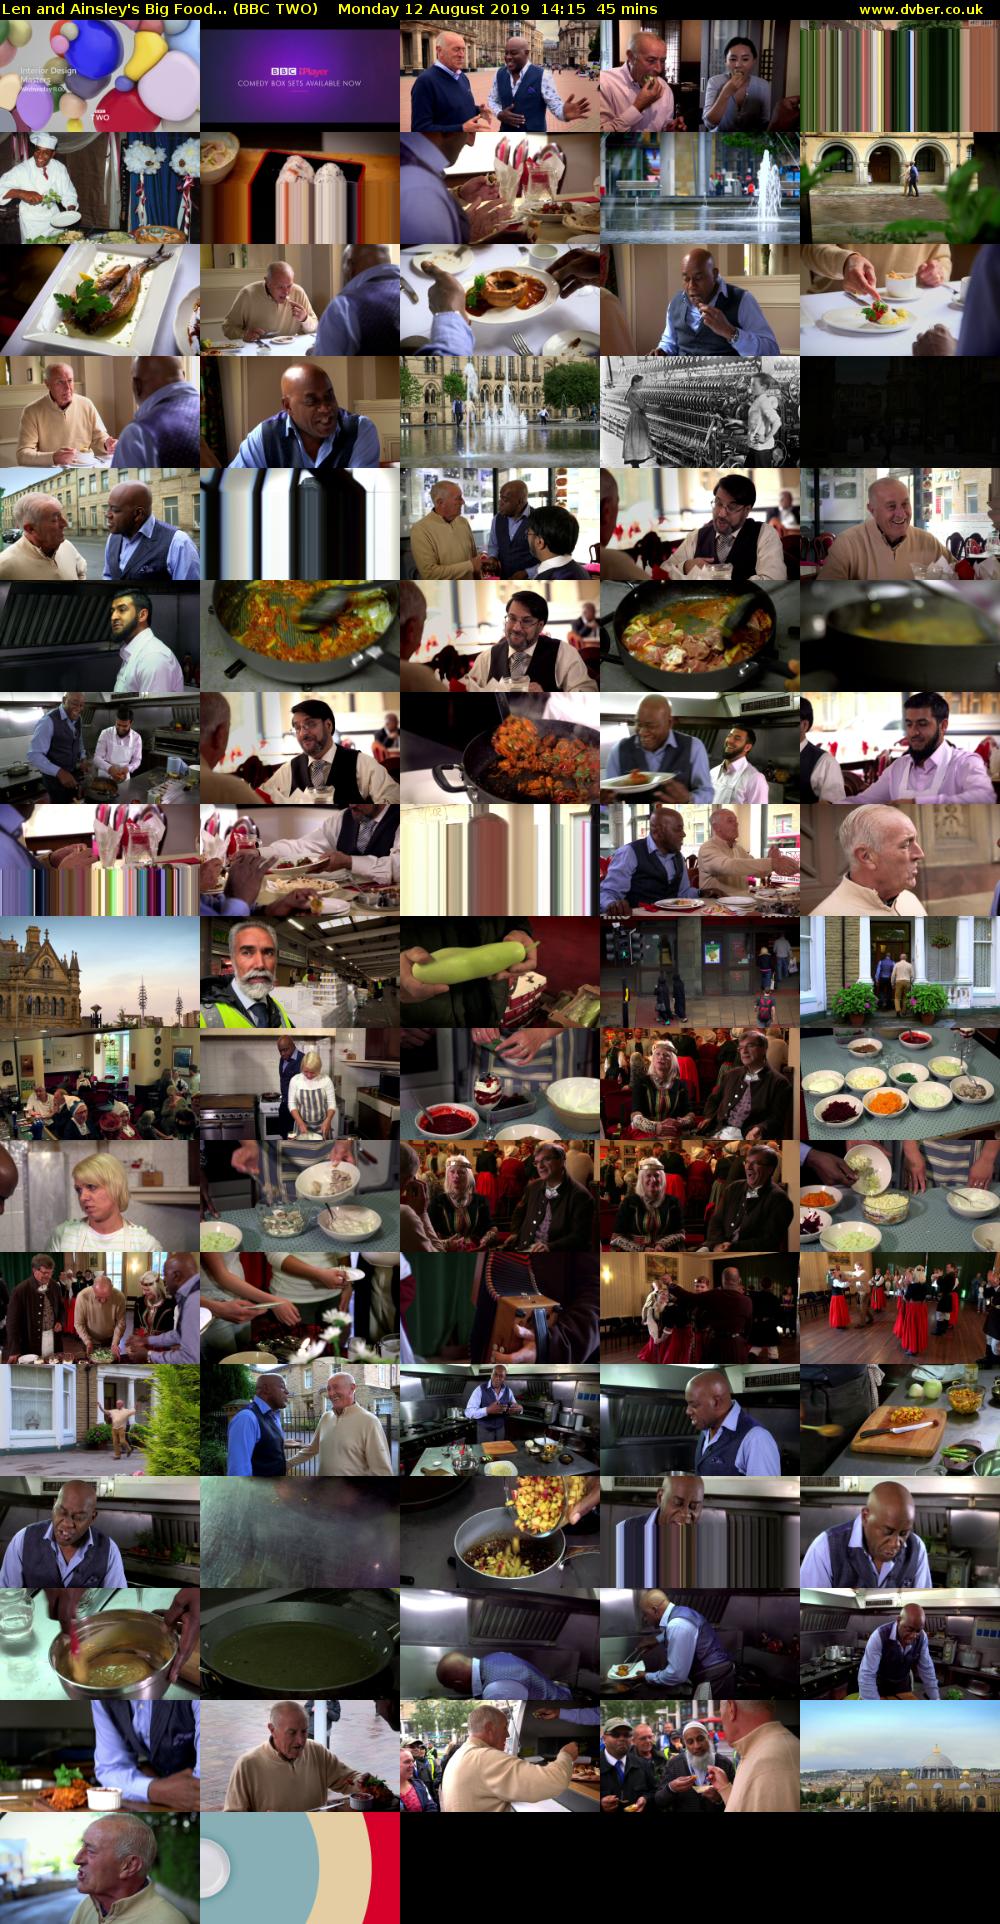 Len and Ainsley's Big Food... (BBC TWO) Monday 12 August 2019 14:15 - 15:00